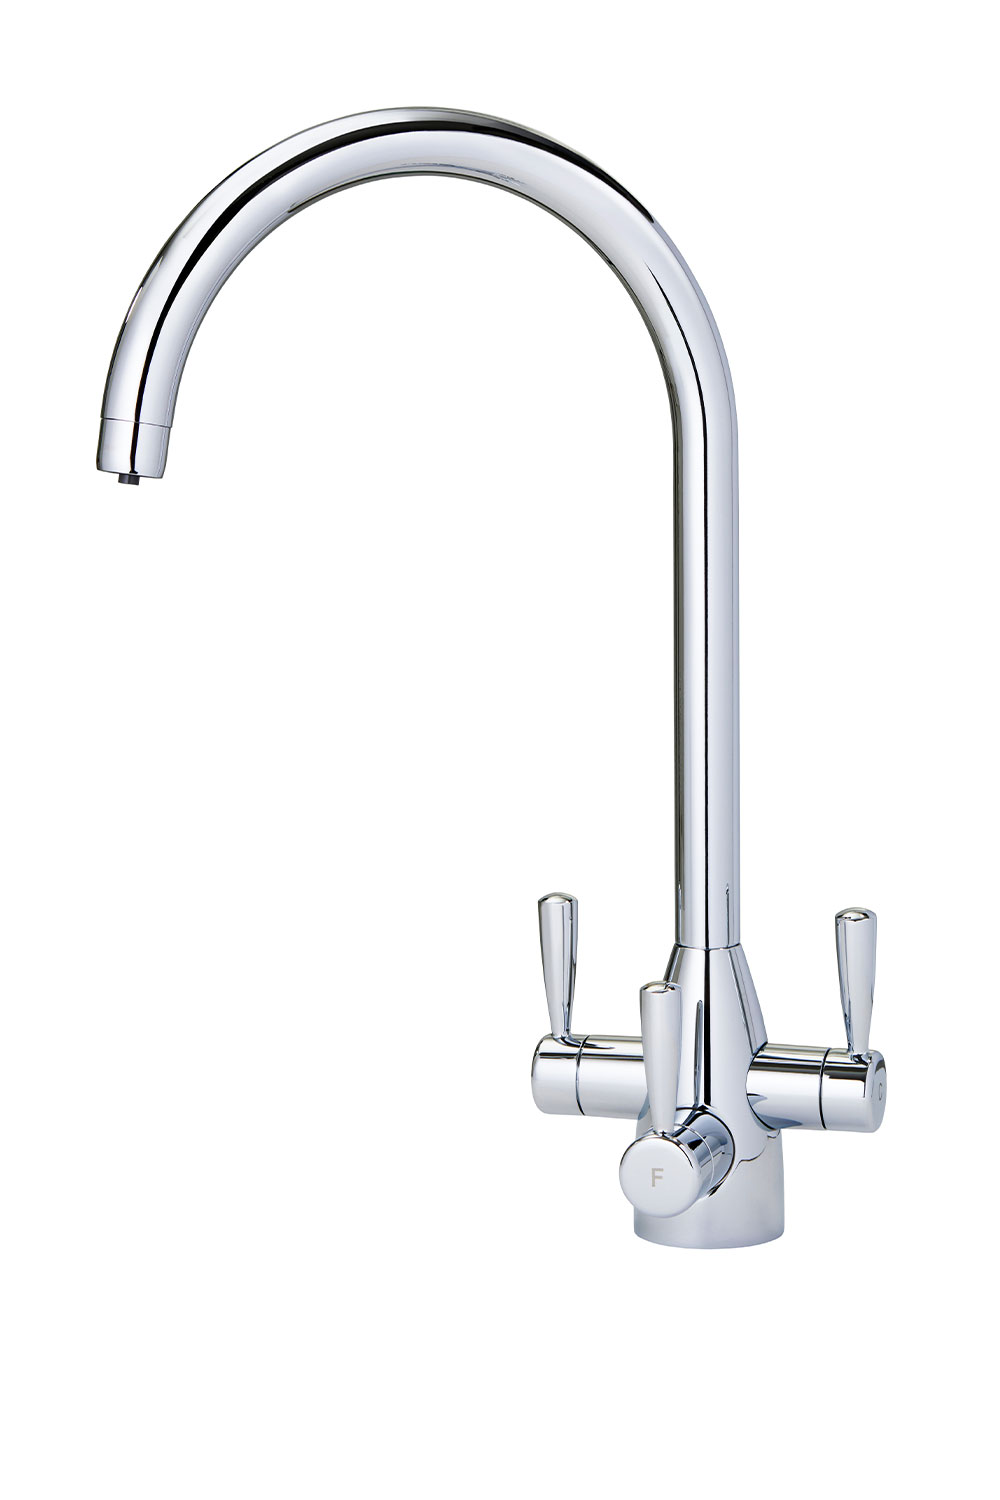 3-in-1 Deco "J" Spout | Instant Filter Water Tap